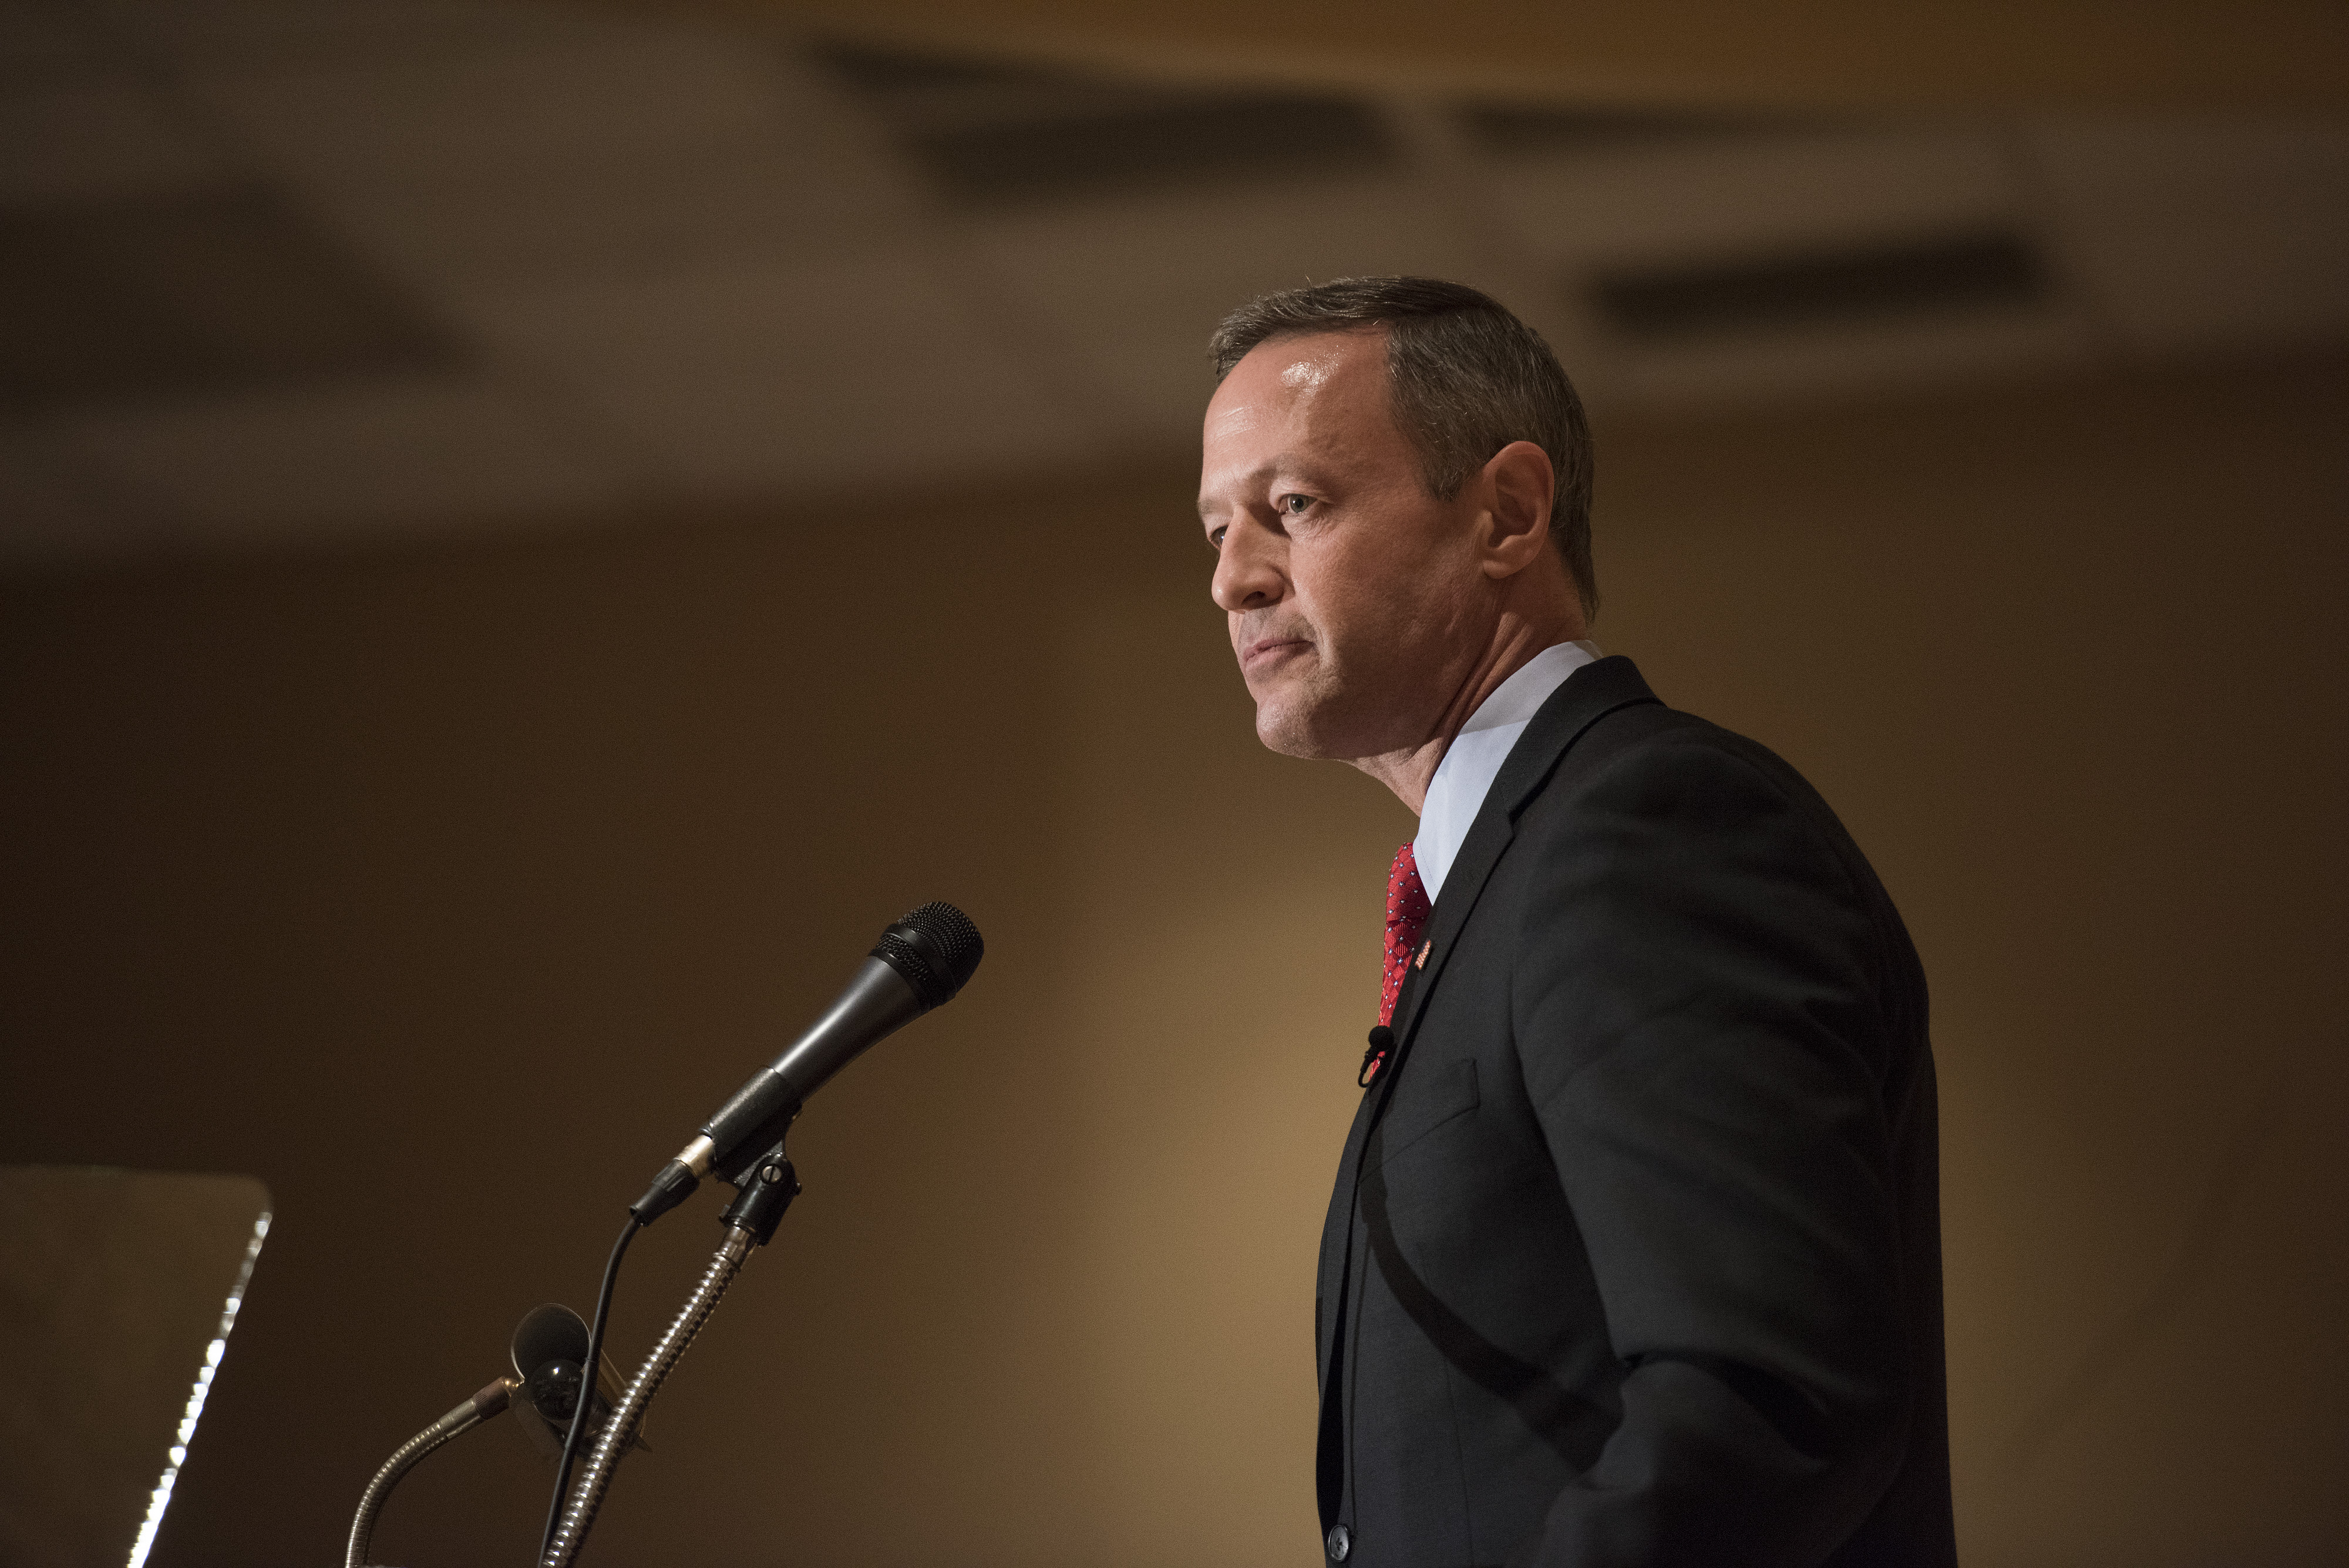 Potential Presidential Candidate Martin O'Malley Speaks At Scott County Democratic Dinner